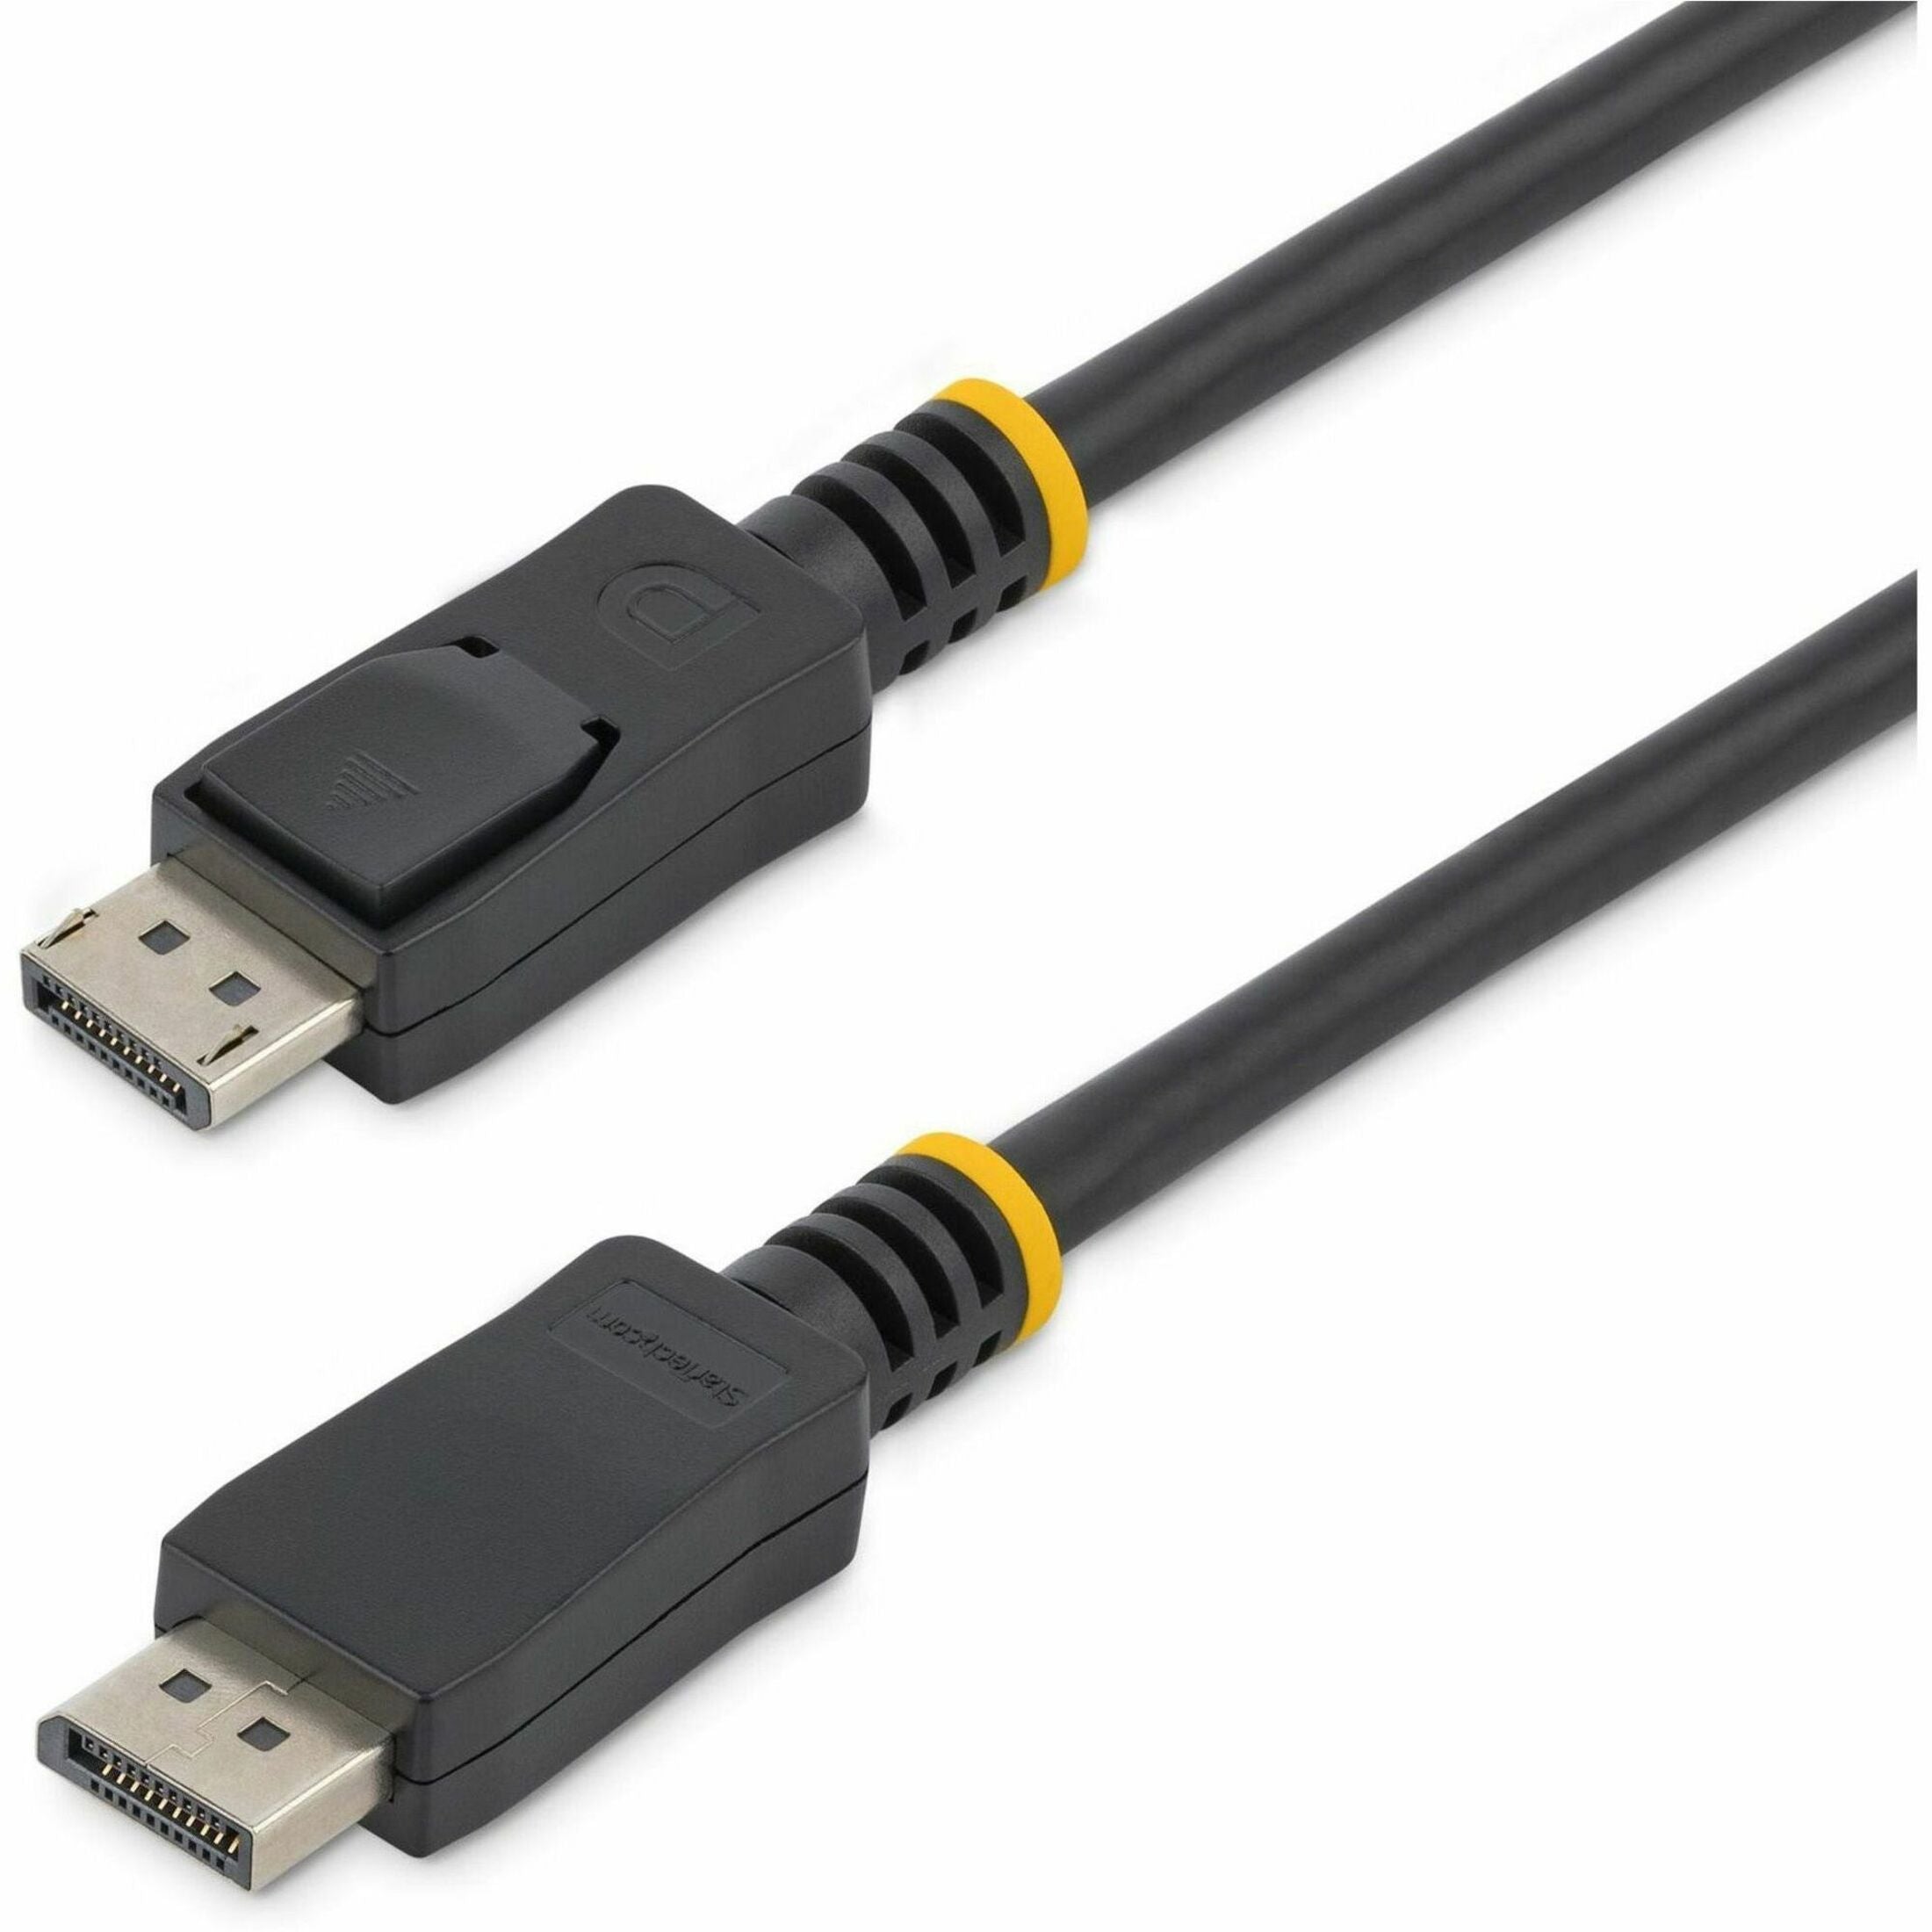 StarTech.com DISPLPORT1L 1 ft Short DisplayPort 1.2 Cable with Latches M/M 4k Video Cable  StarTech.com DISPLPORT1L 1 ft Corto DisplayPort 1.2 Cavo con Chiusure M/M Cavo Video 4k